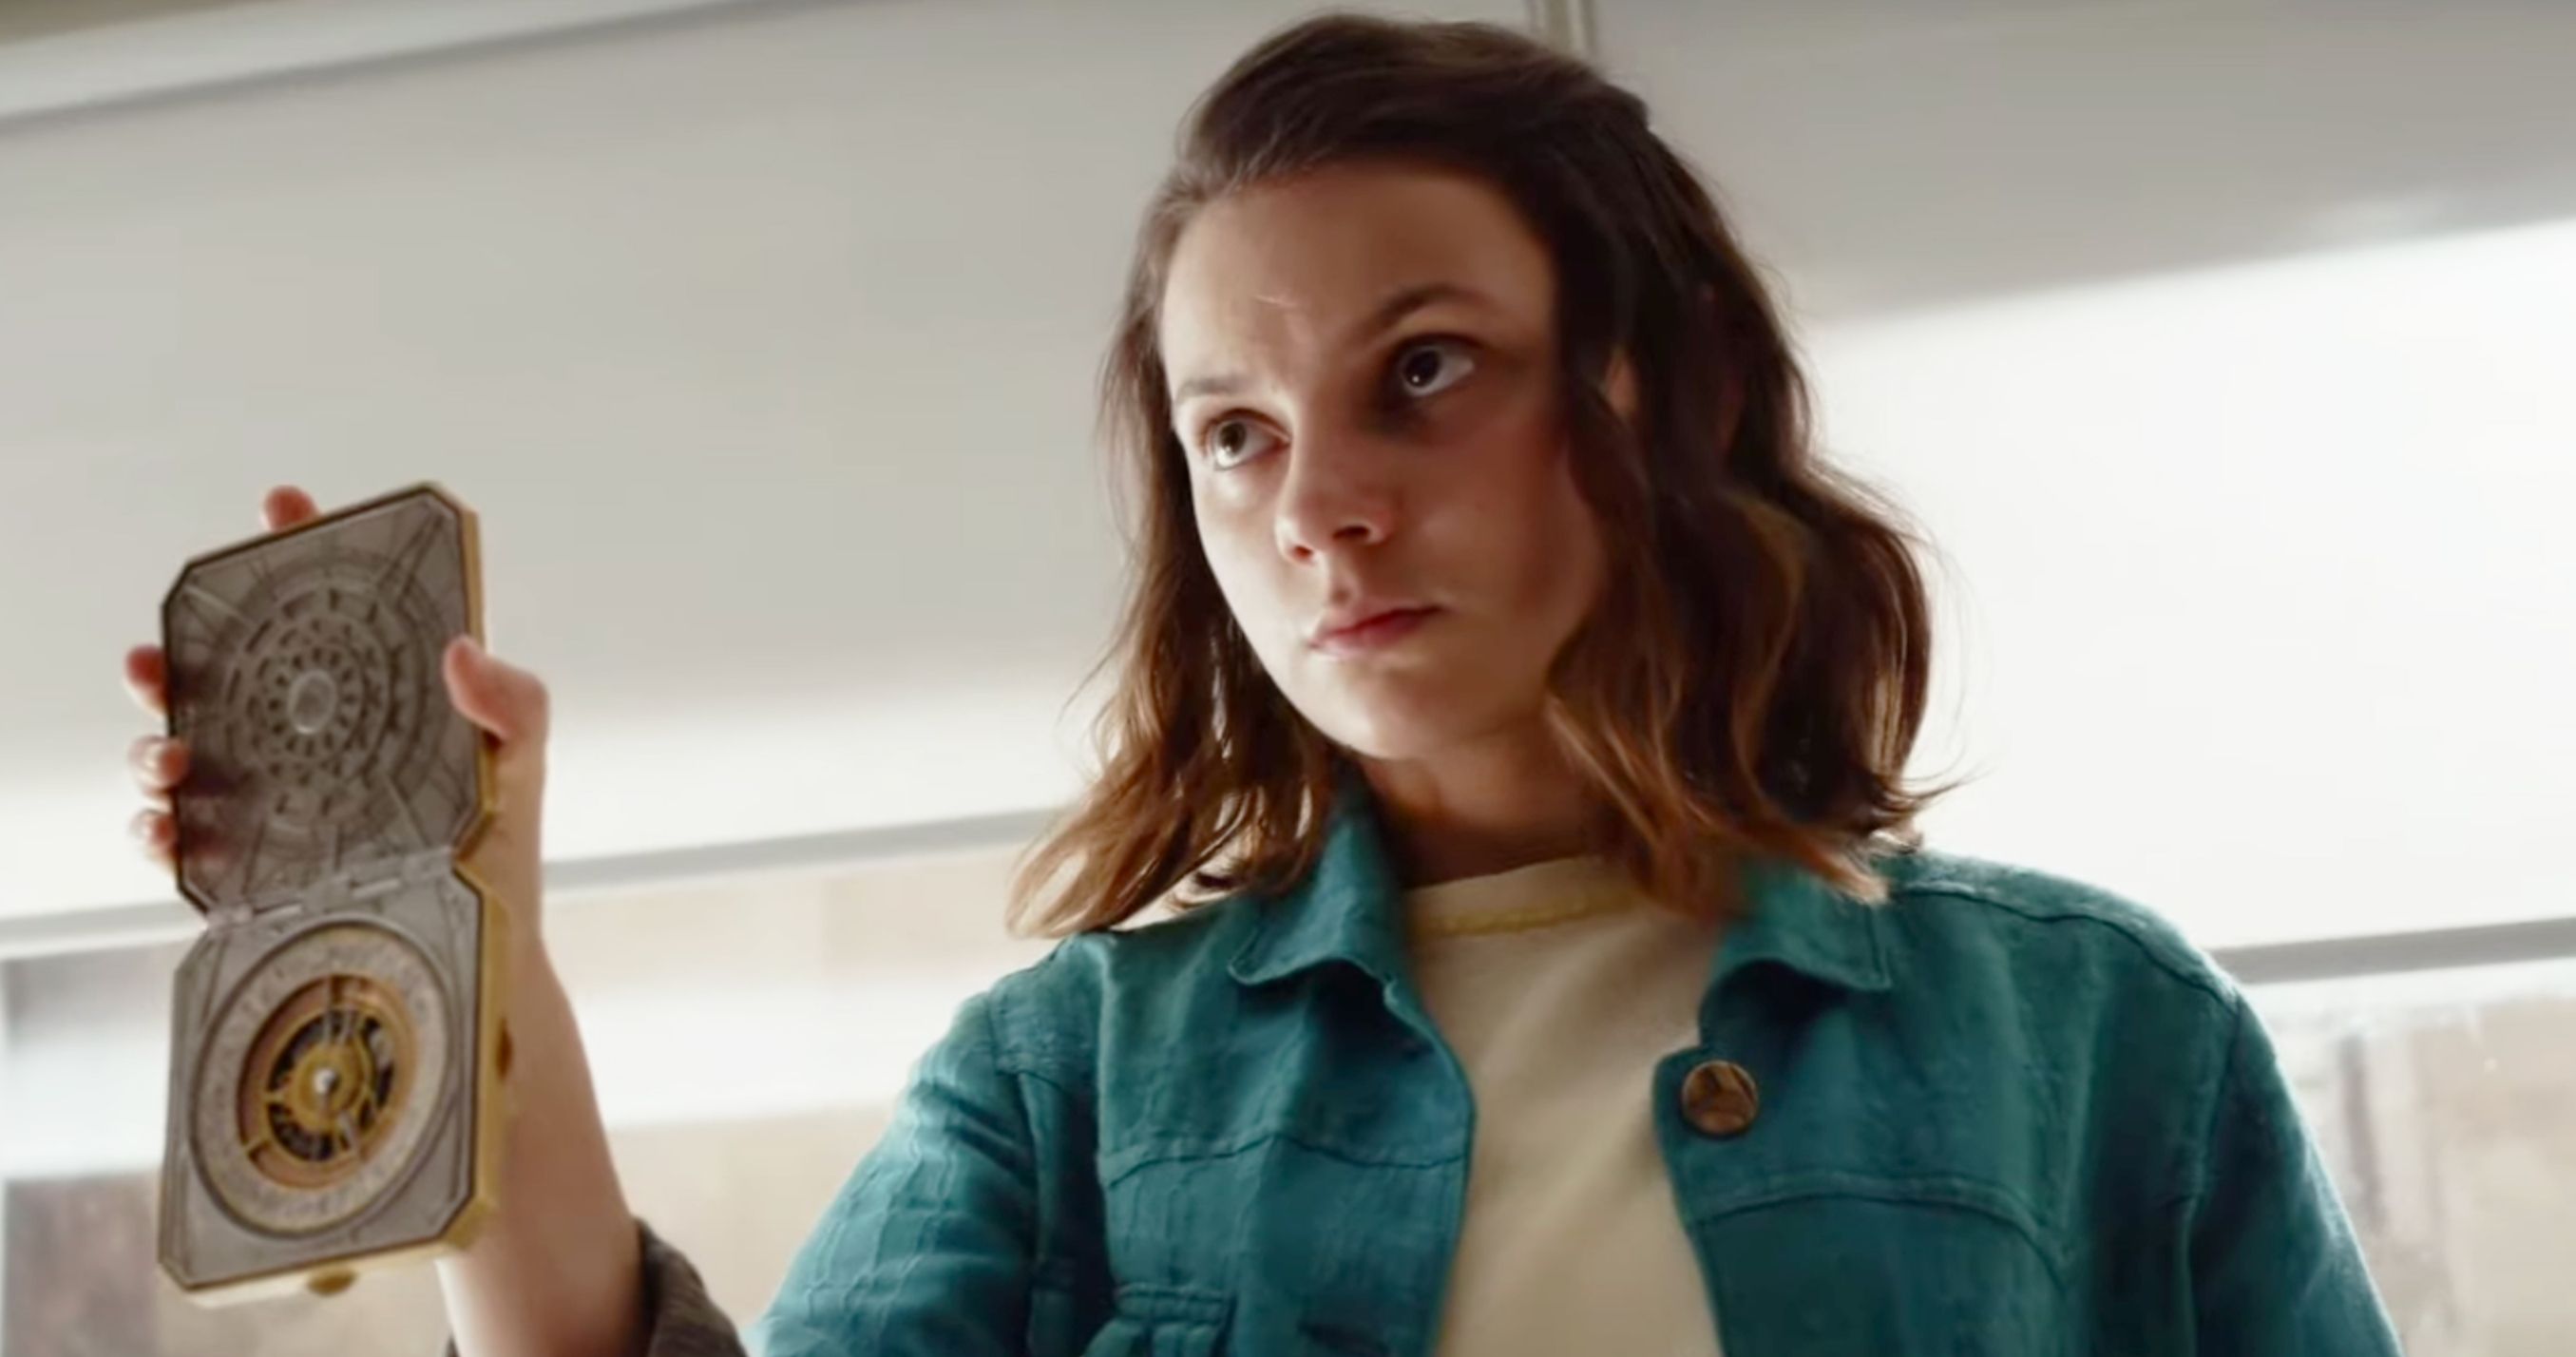 His Dark Materials Season 2 Trailer Arrives from Comic-Con at Home